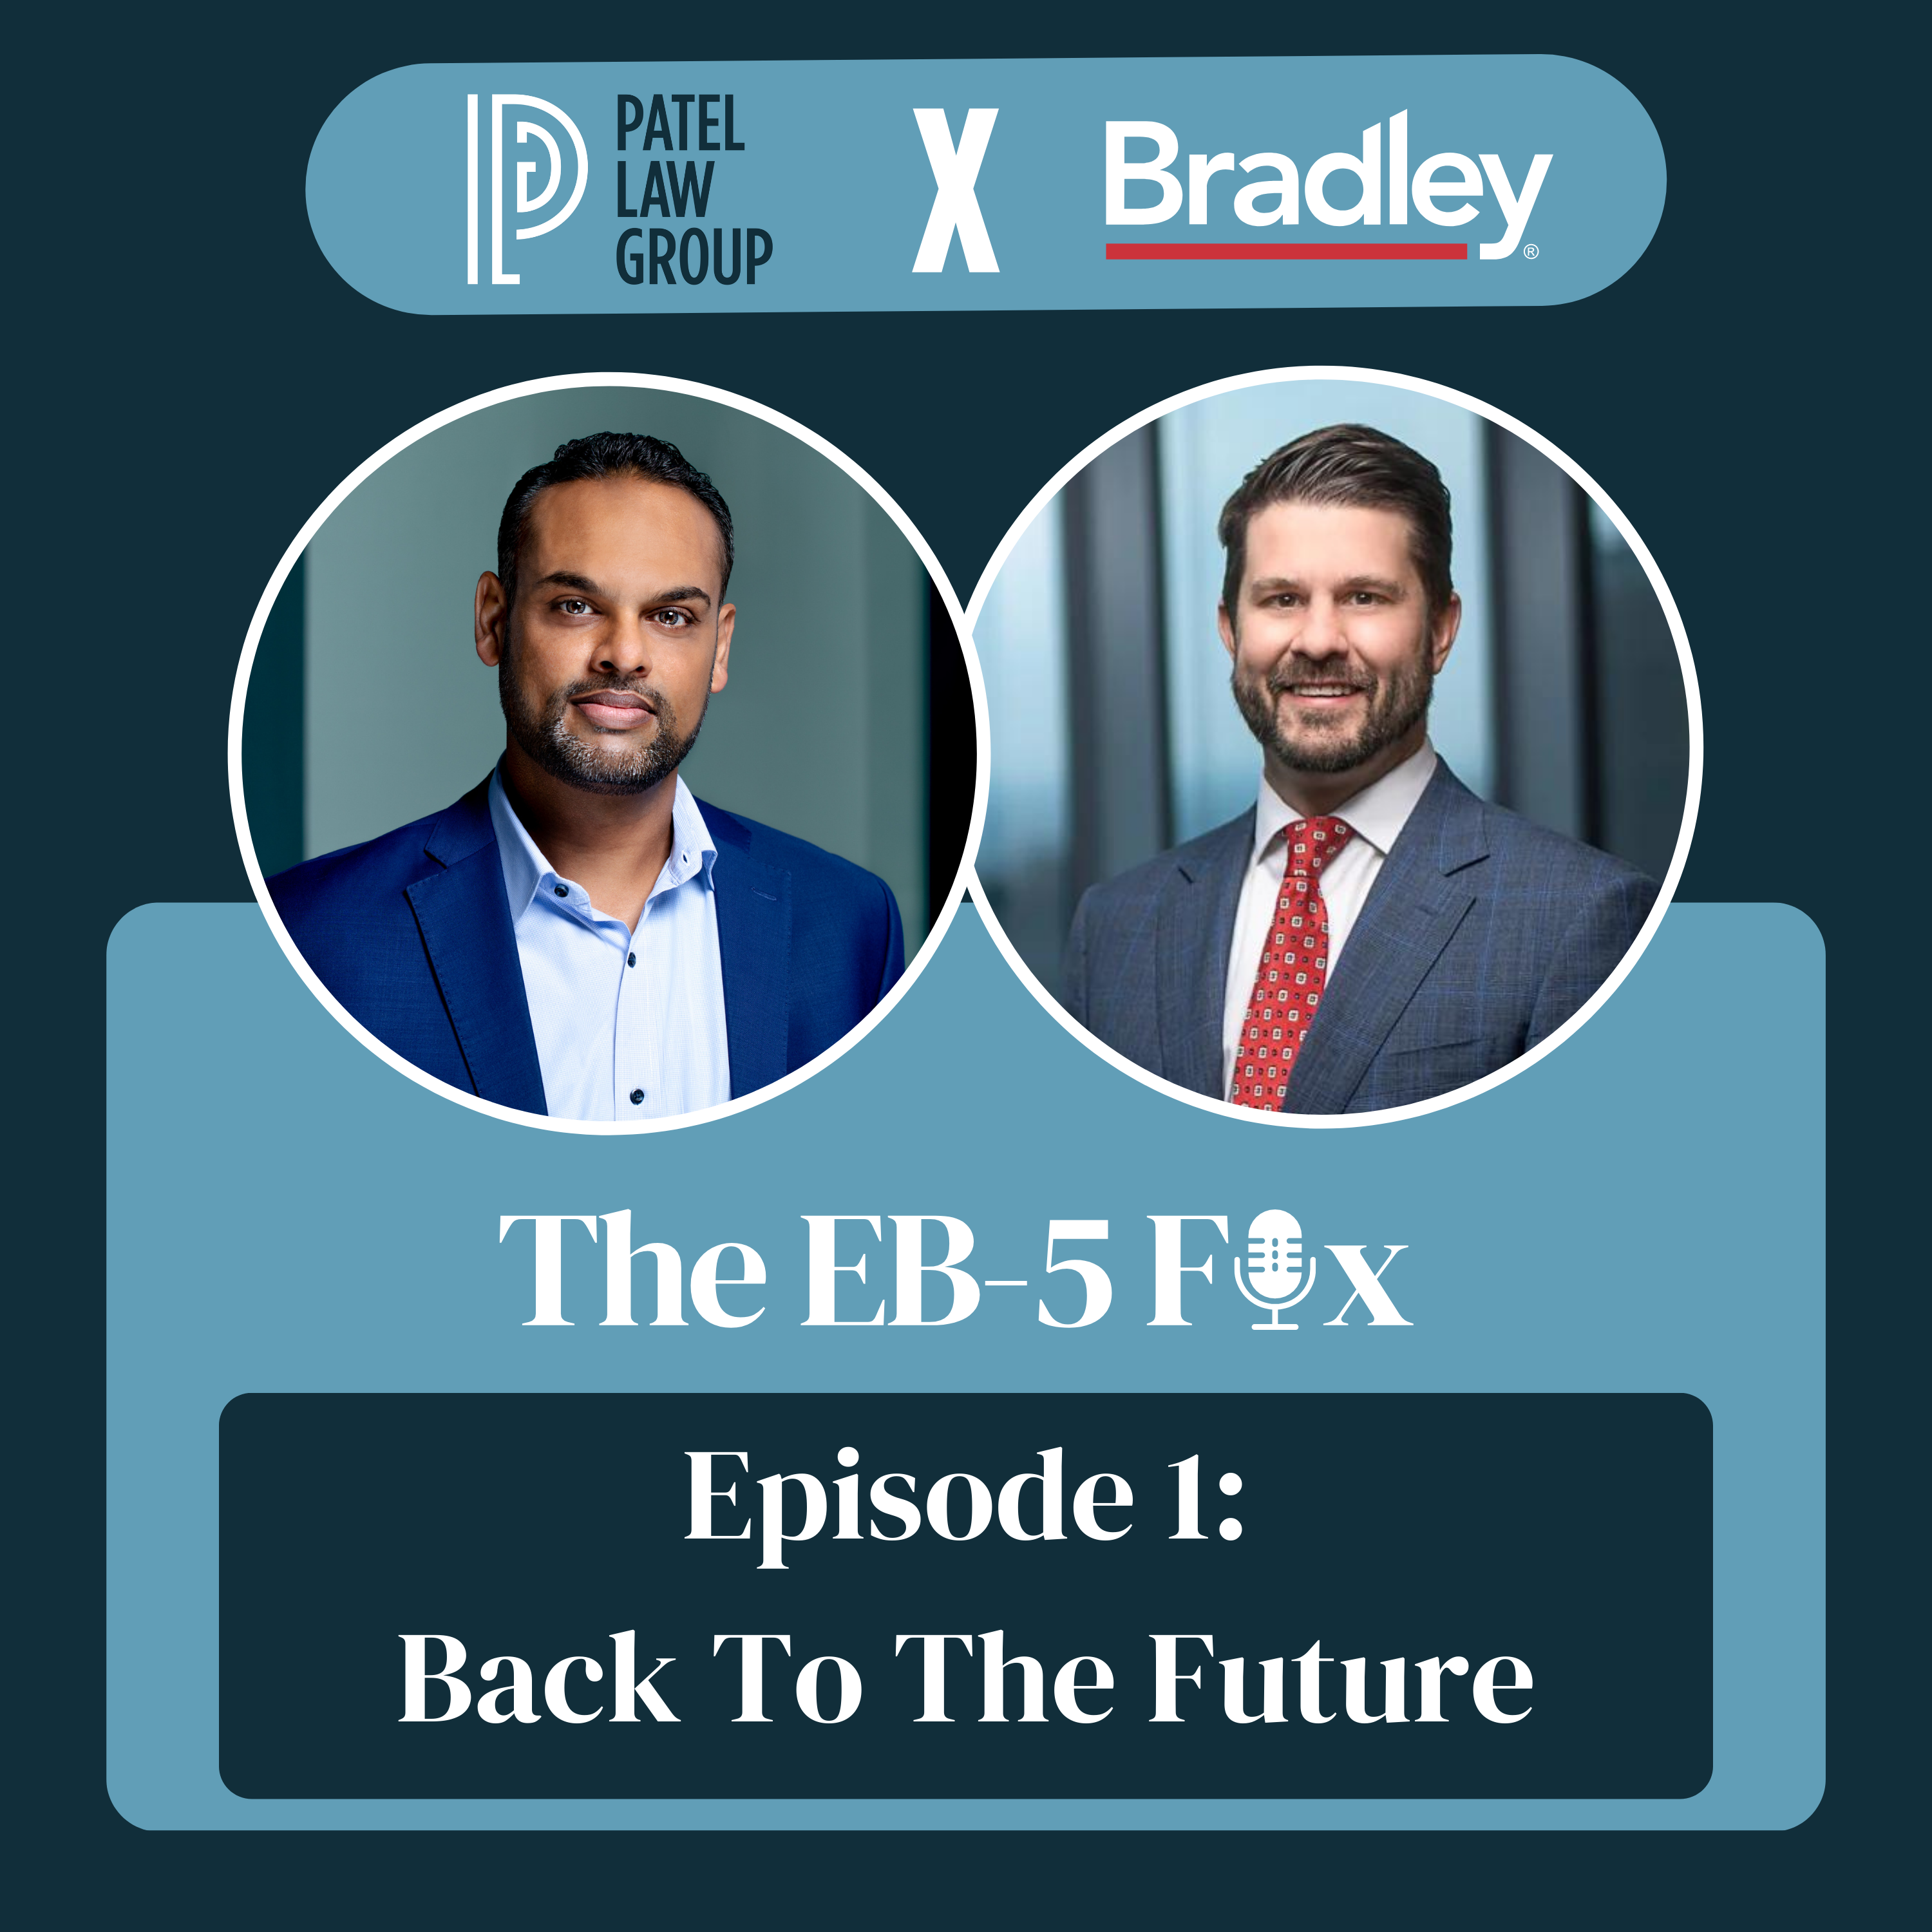 Episode 1 - Back To The Future